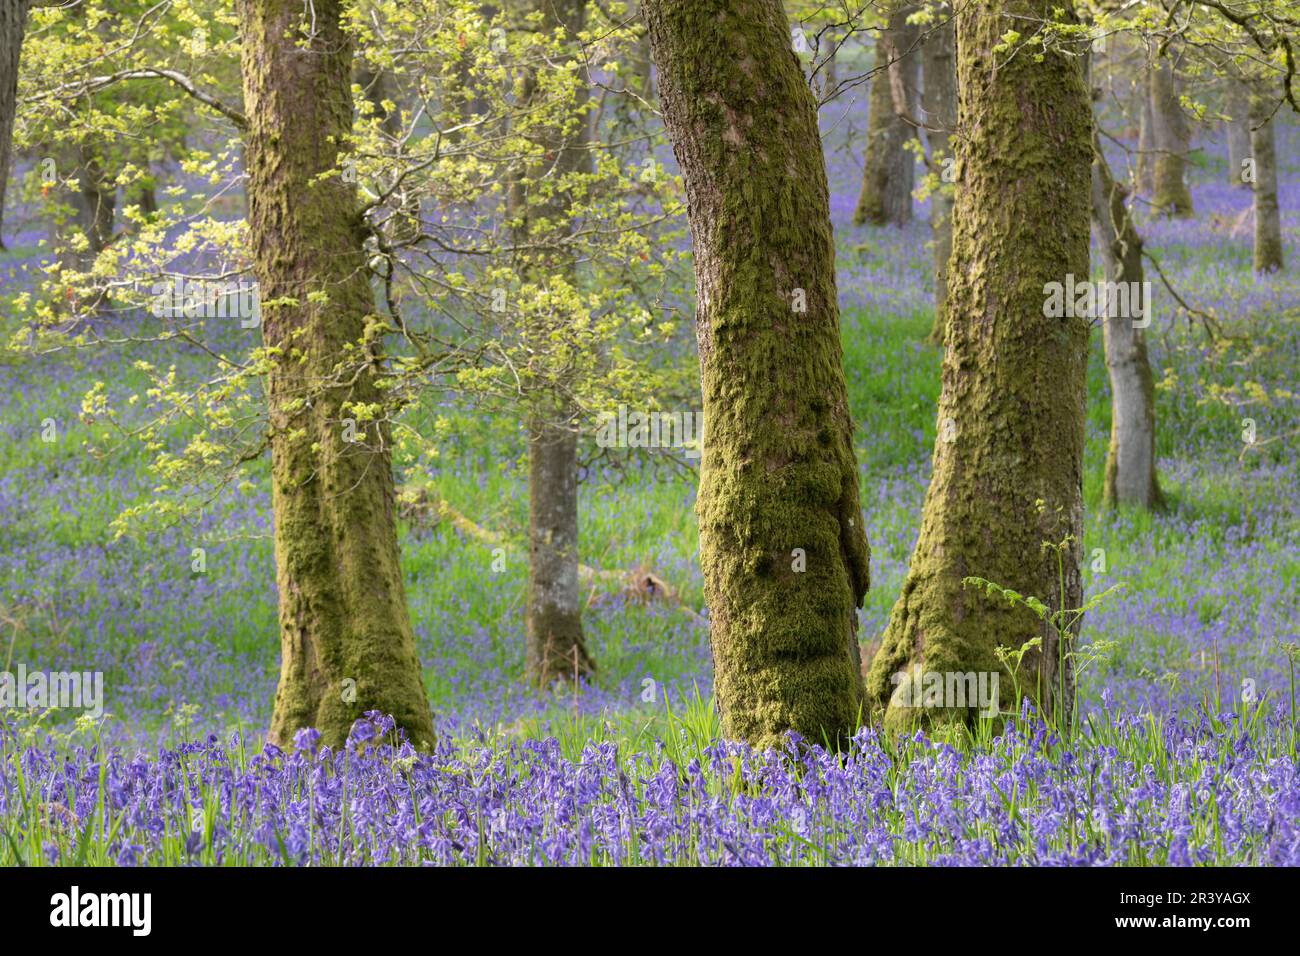 Moss Covered Oak Trees in the Ancient Woodland at Kinclaven Bluebell Wood in Perthshire with Native Bluebells (Hyacinthoides Non-scripta) in Flower Stock Photo